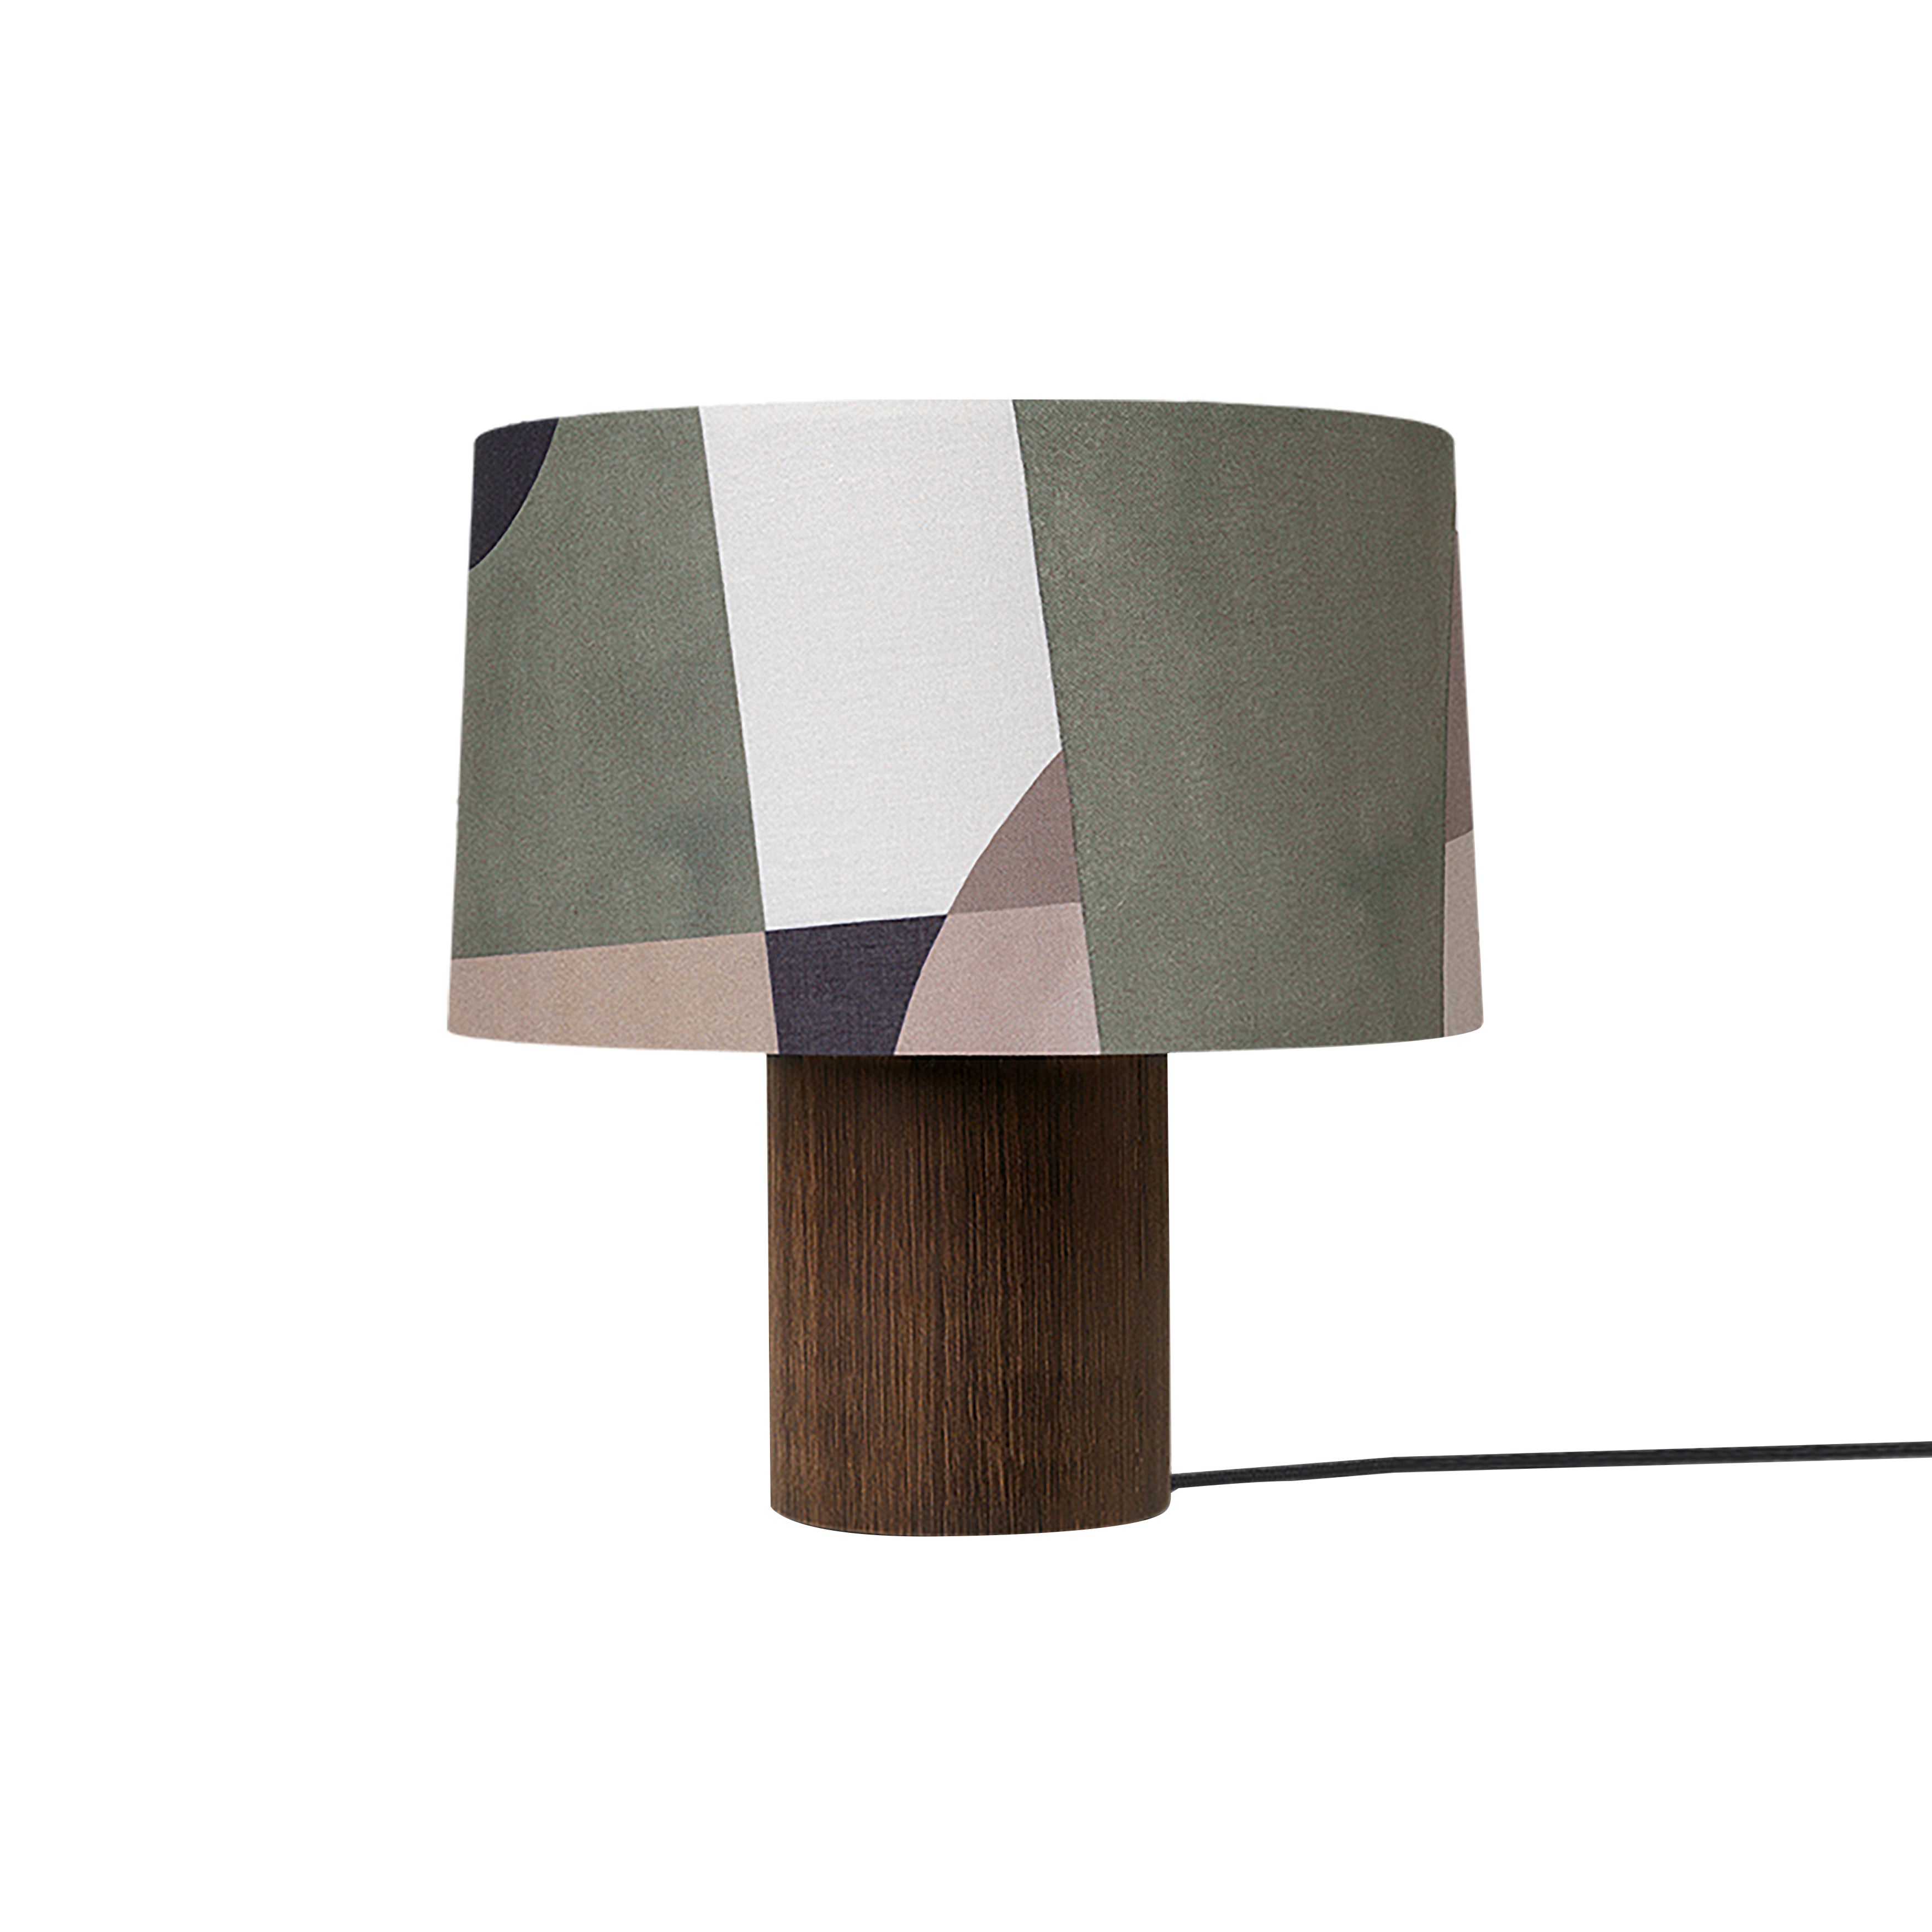 Entire Post Table lamp: Solid